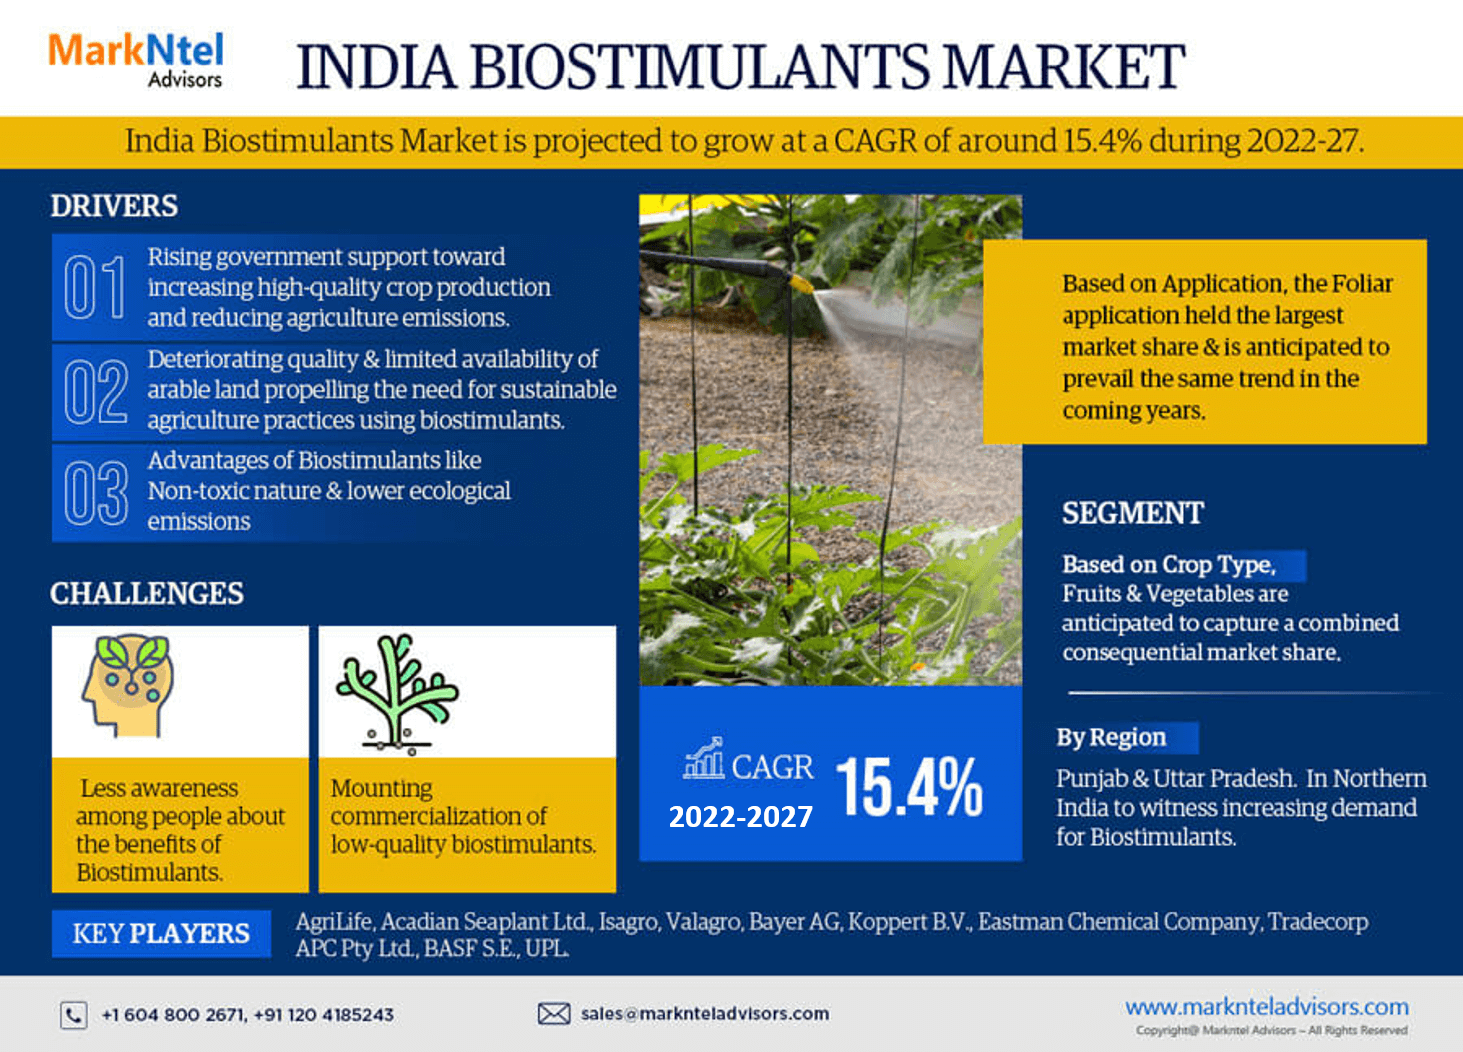 India Biostimulants Market Charts Course for 15.4% CAGR Advancement in Forecast Period 2022-2027.